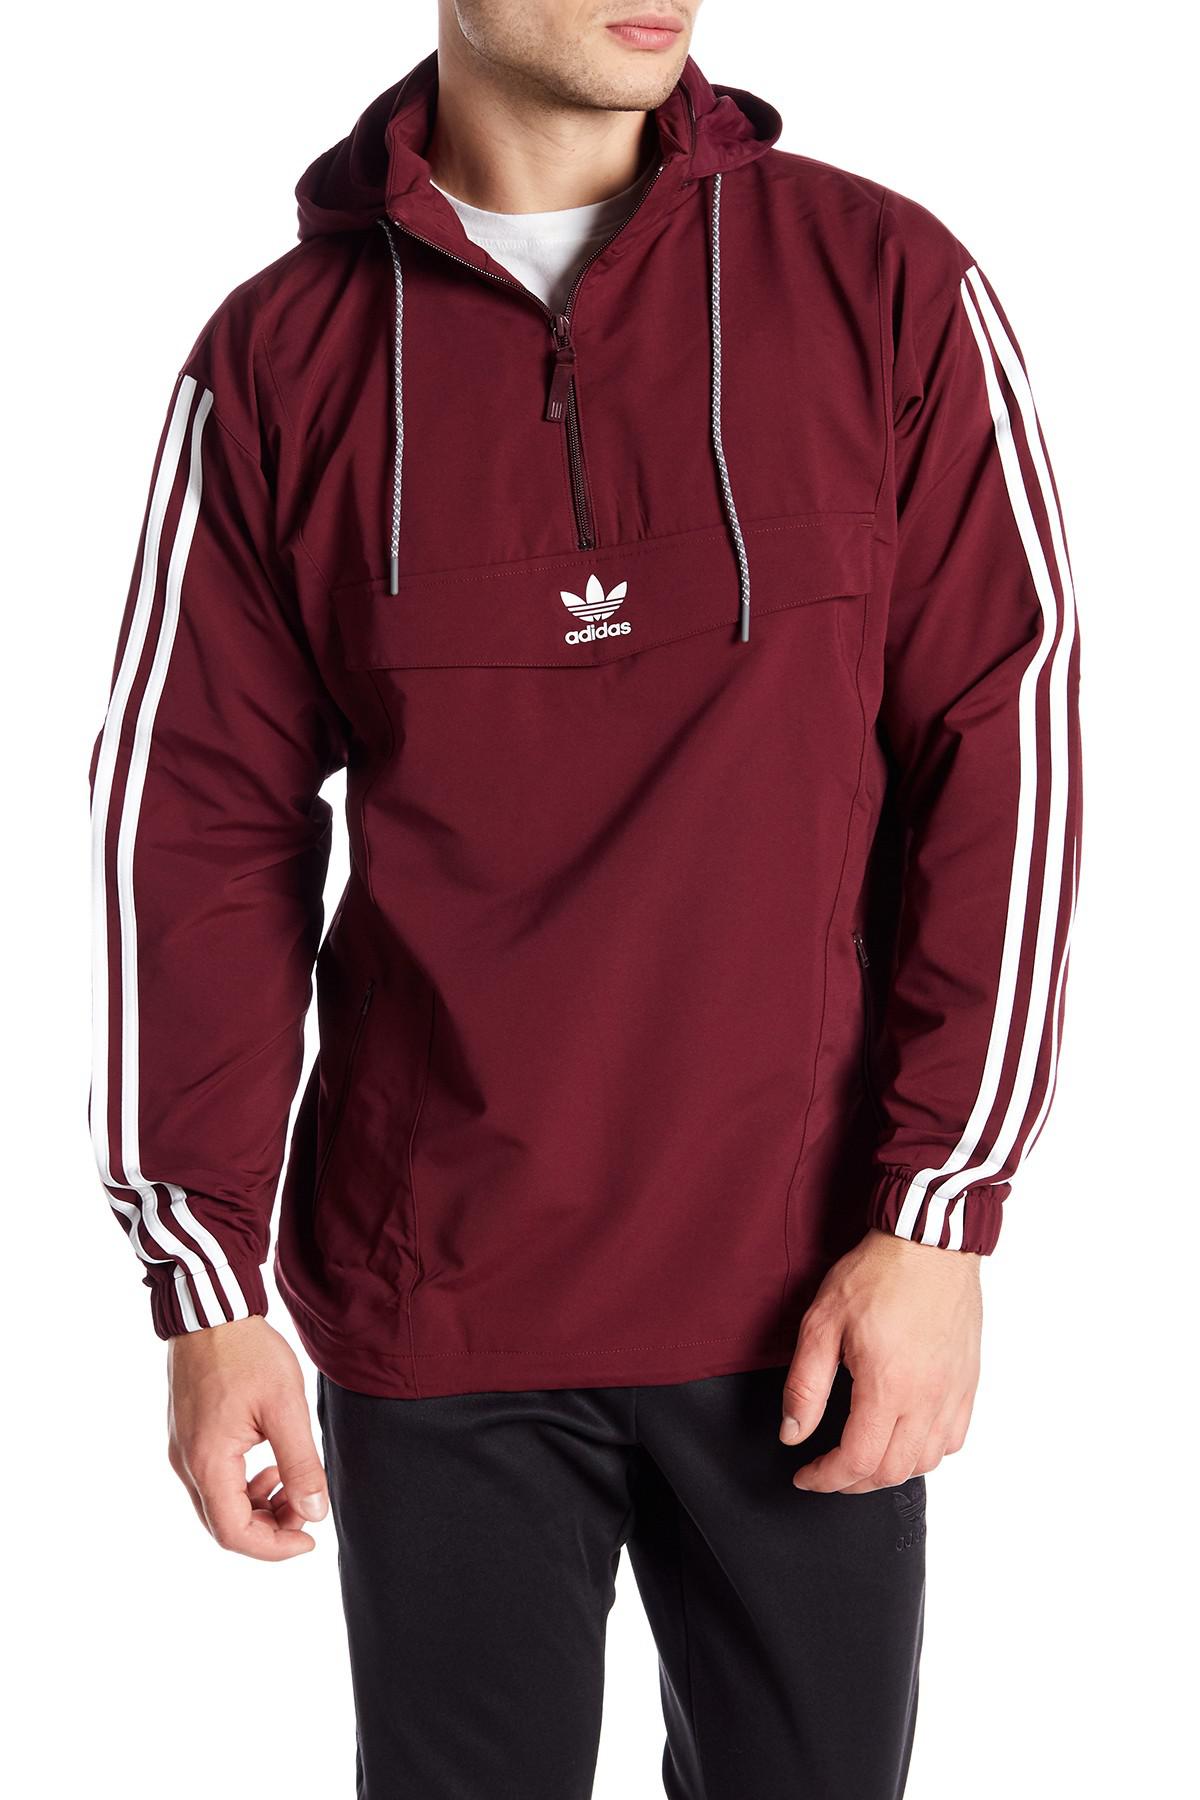 adidas Originals Synthetic Blocked Anorak in Maroon (Red) for Men - Lyst